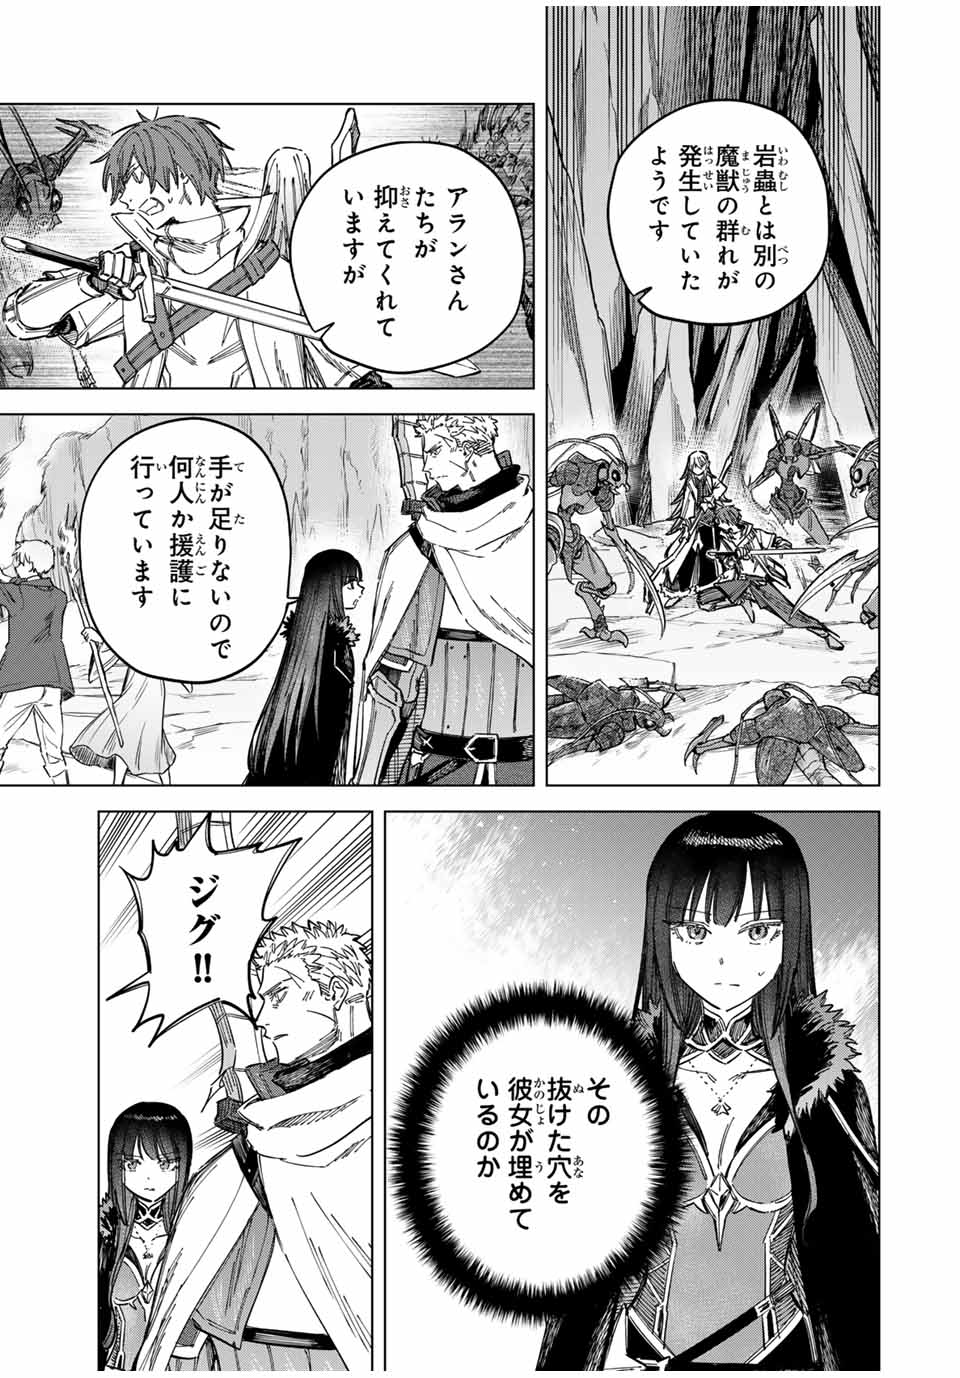 Witch and Mercenary 魔女と傭兵 第18話 - Page 3